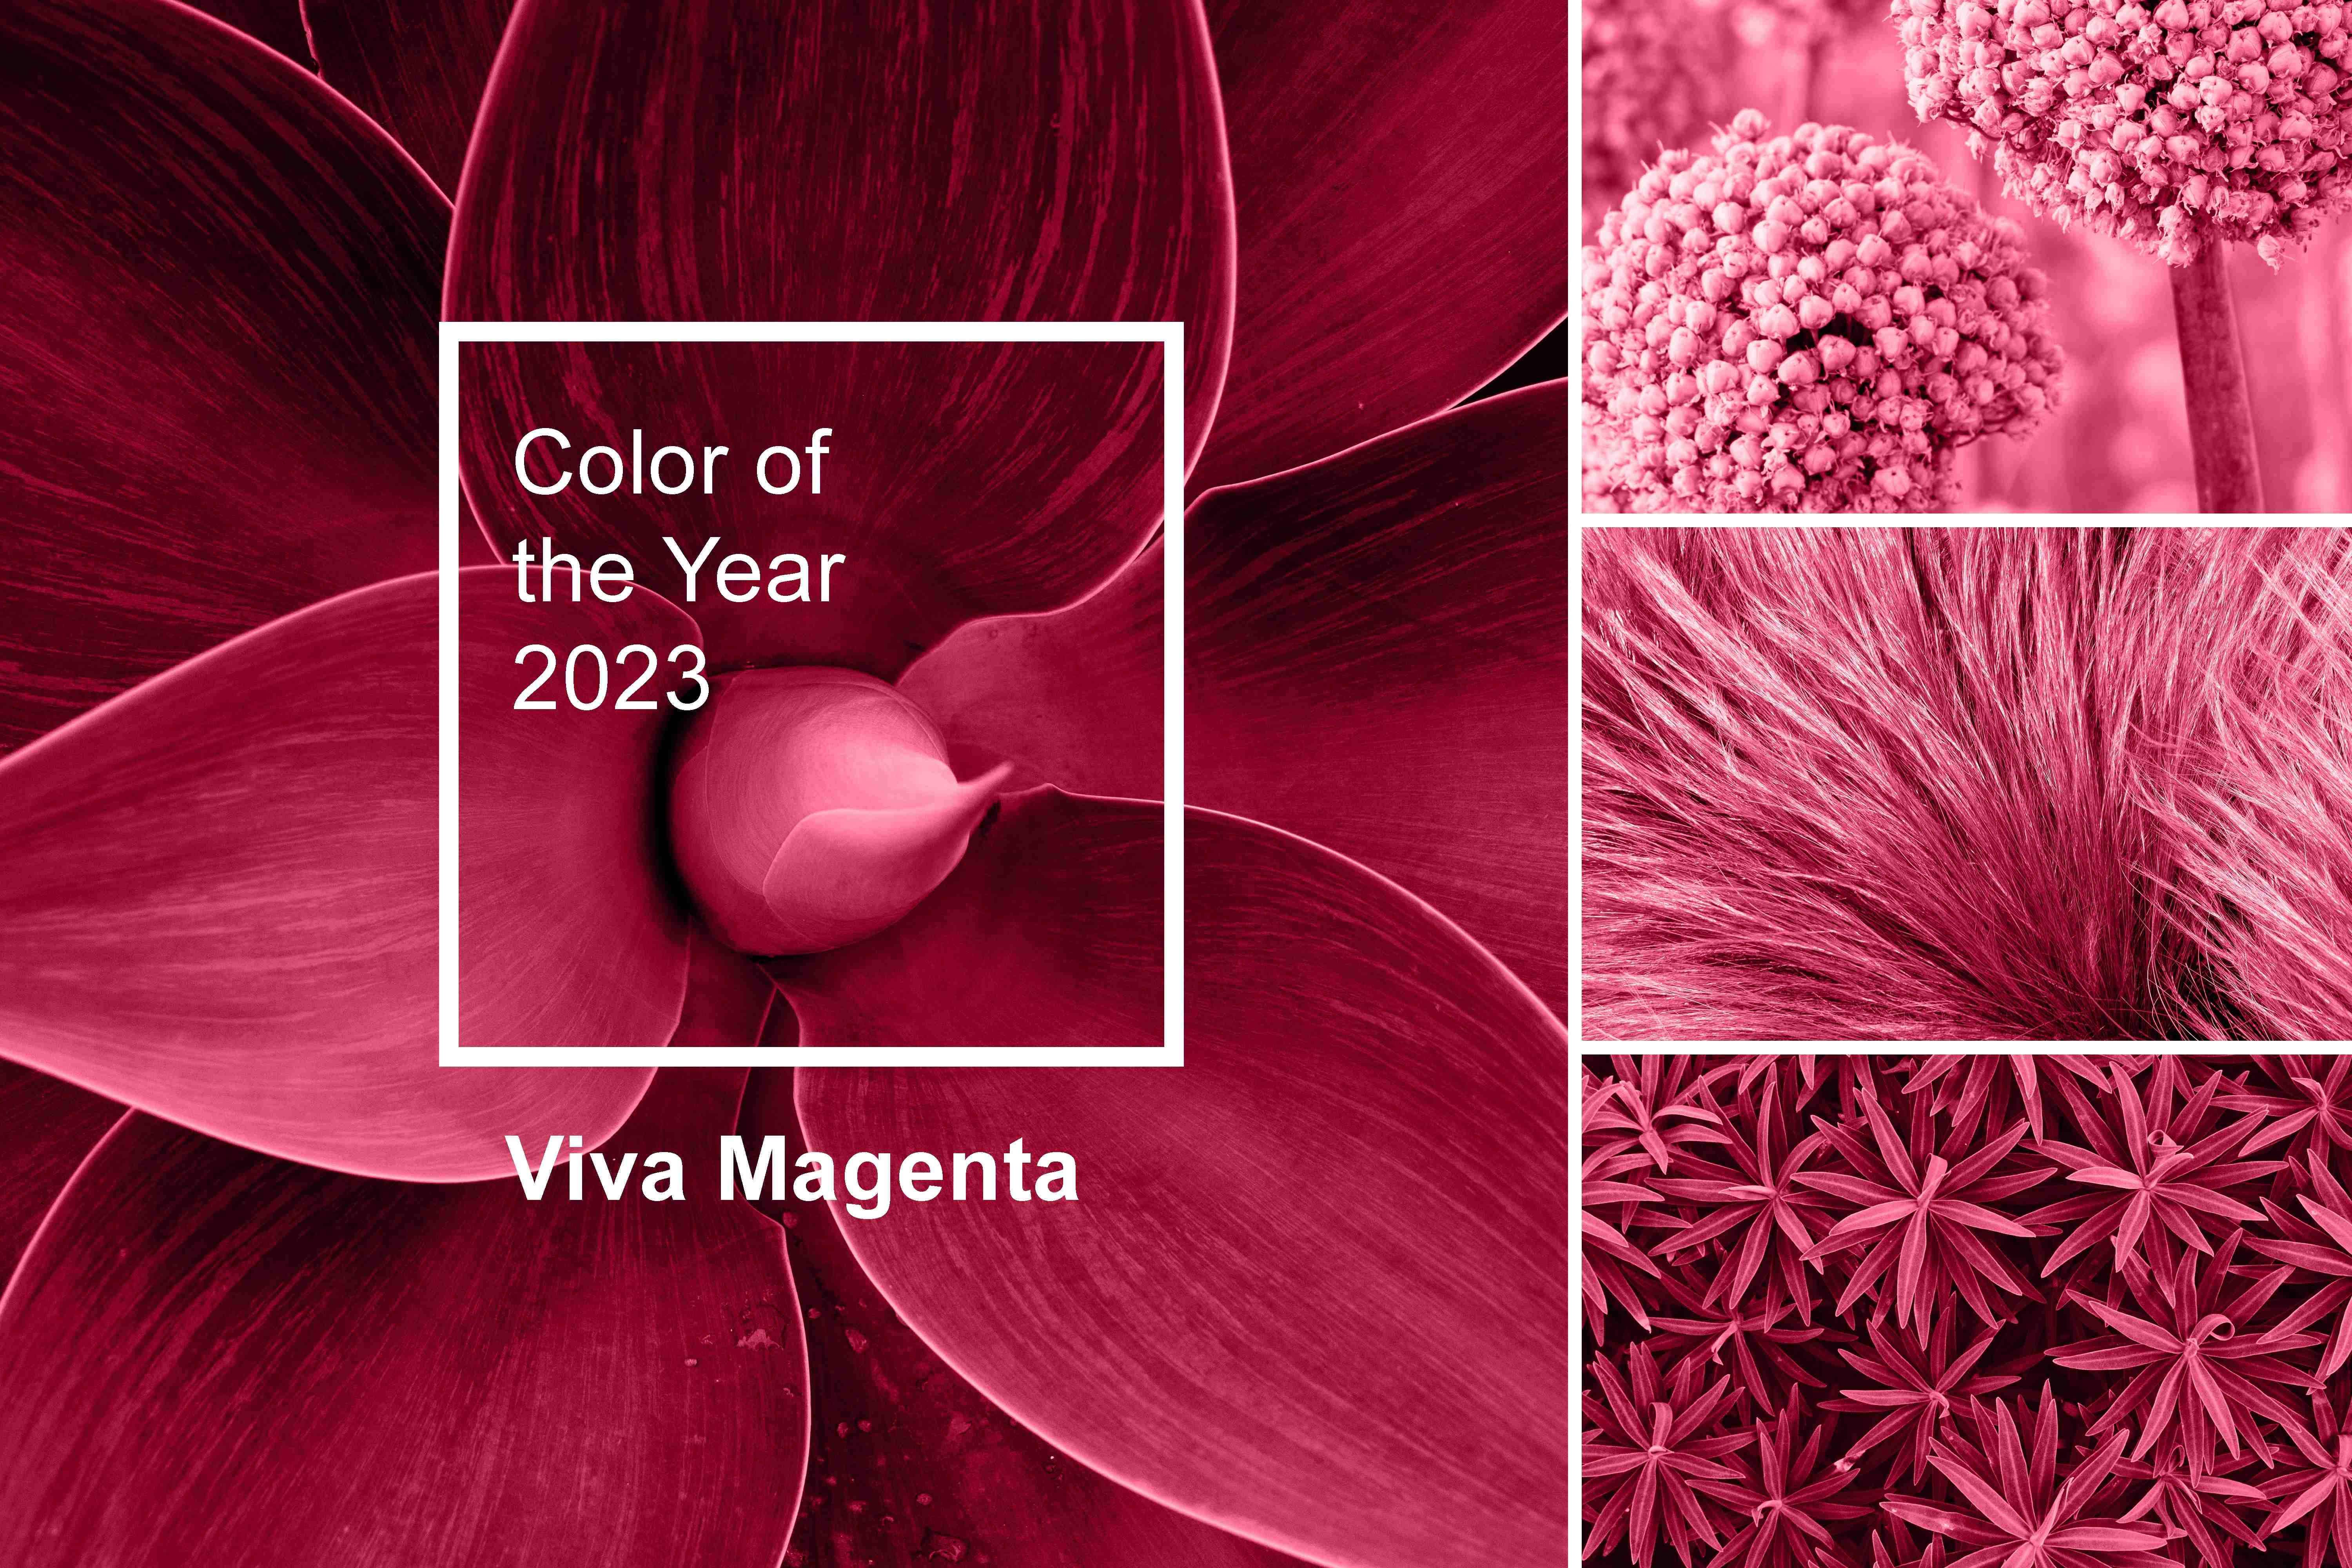 Reasons why Pantone picked Viva Magenta as the color for 2023